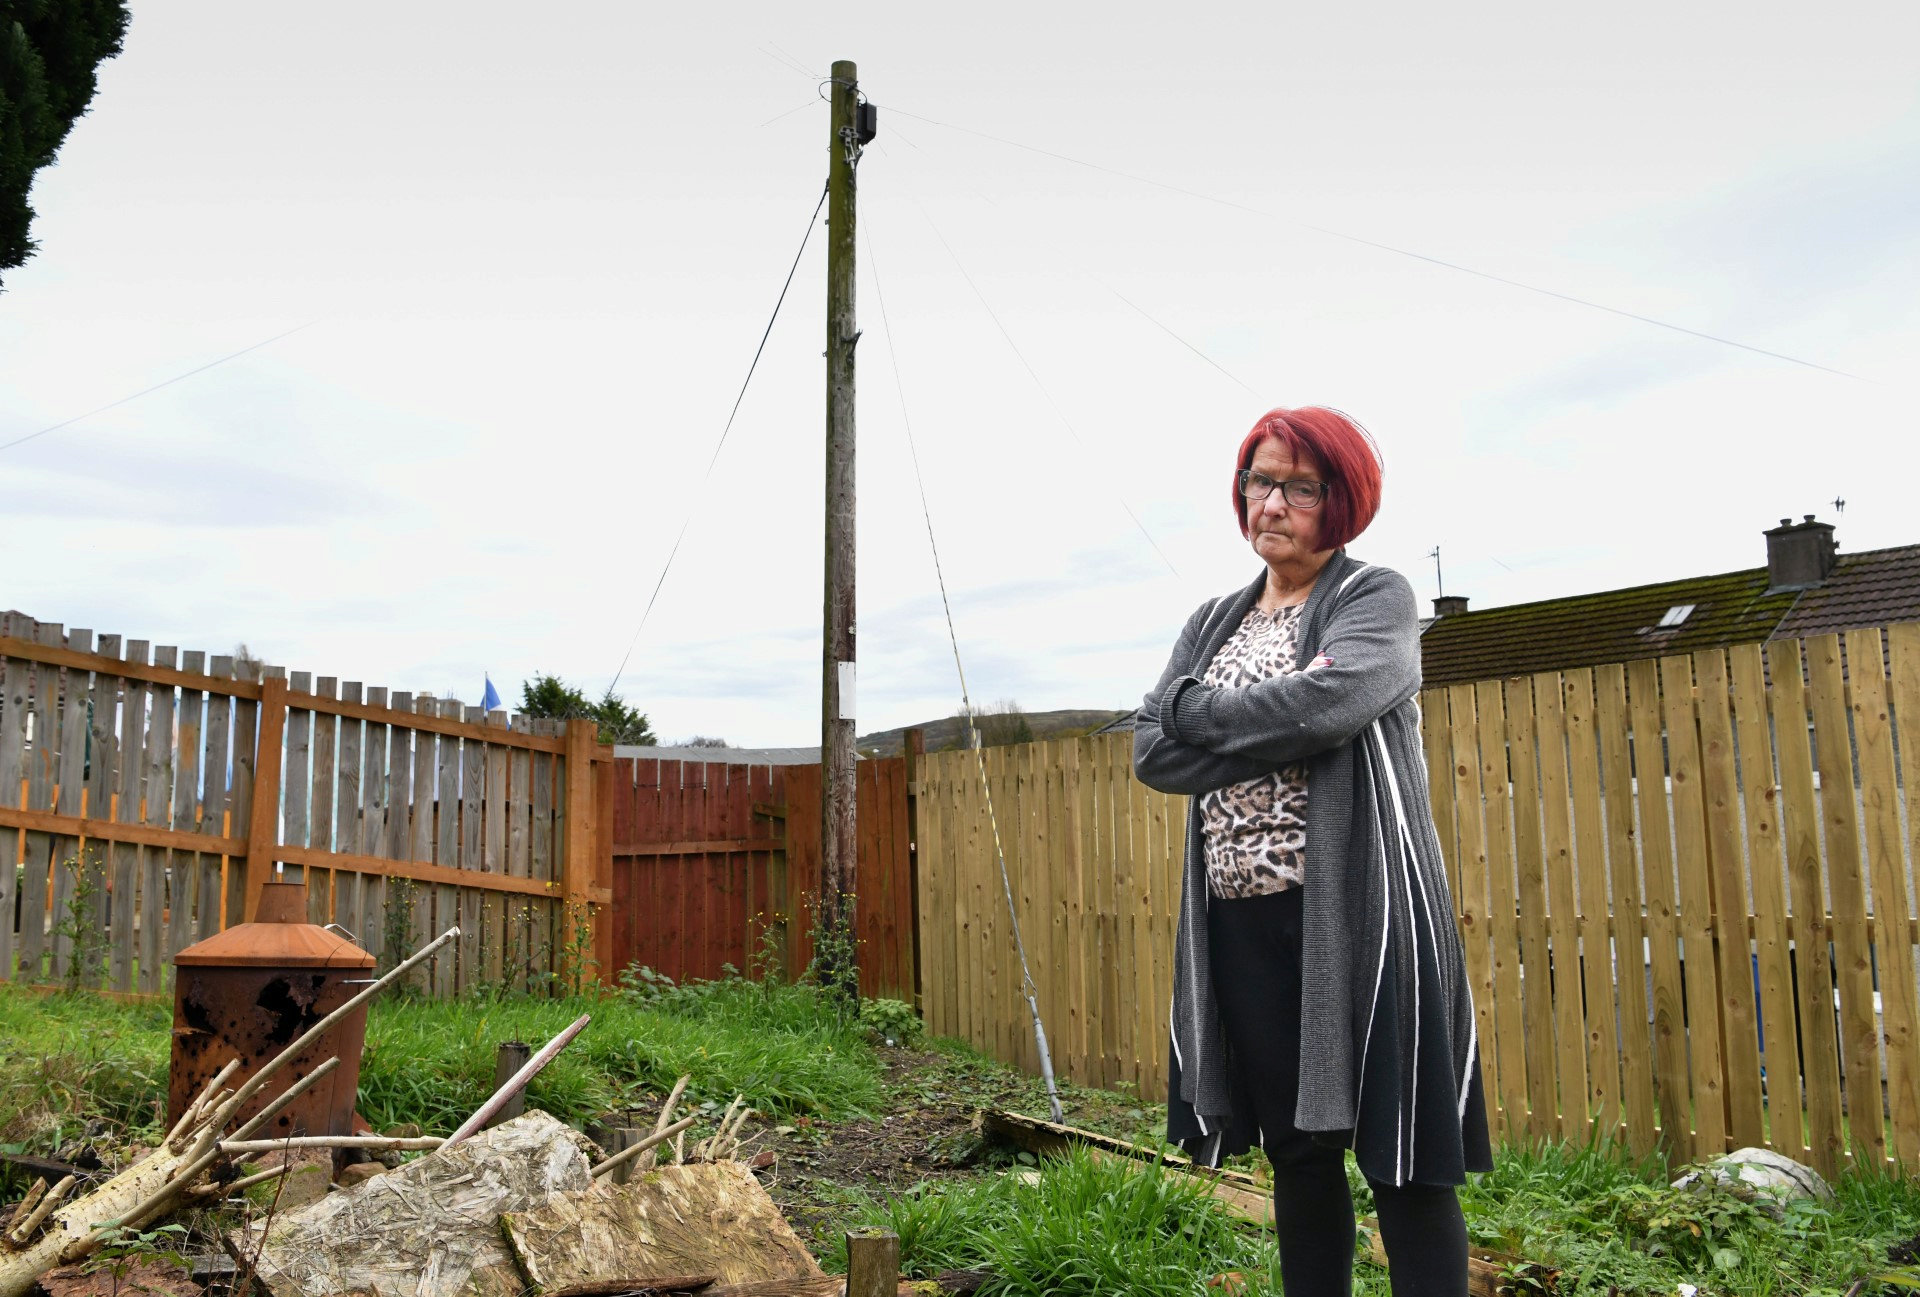 I’m fuming over telecom company ruining my garden – I want a deck but they want ME to pay £1,000 to fix it  